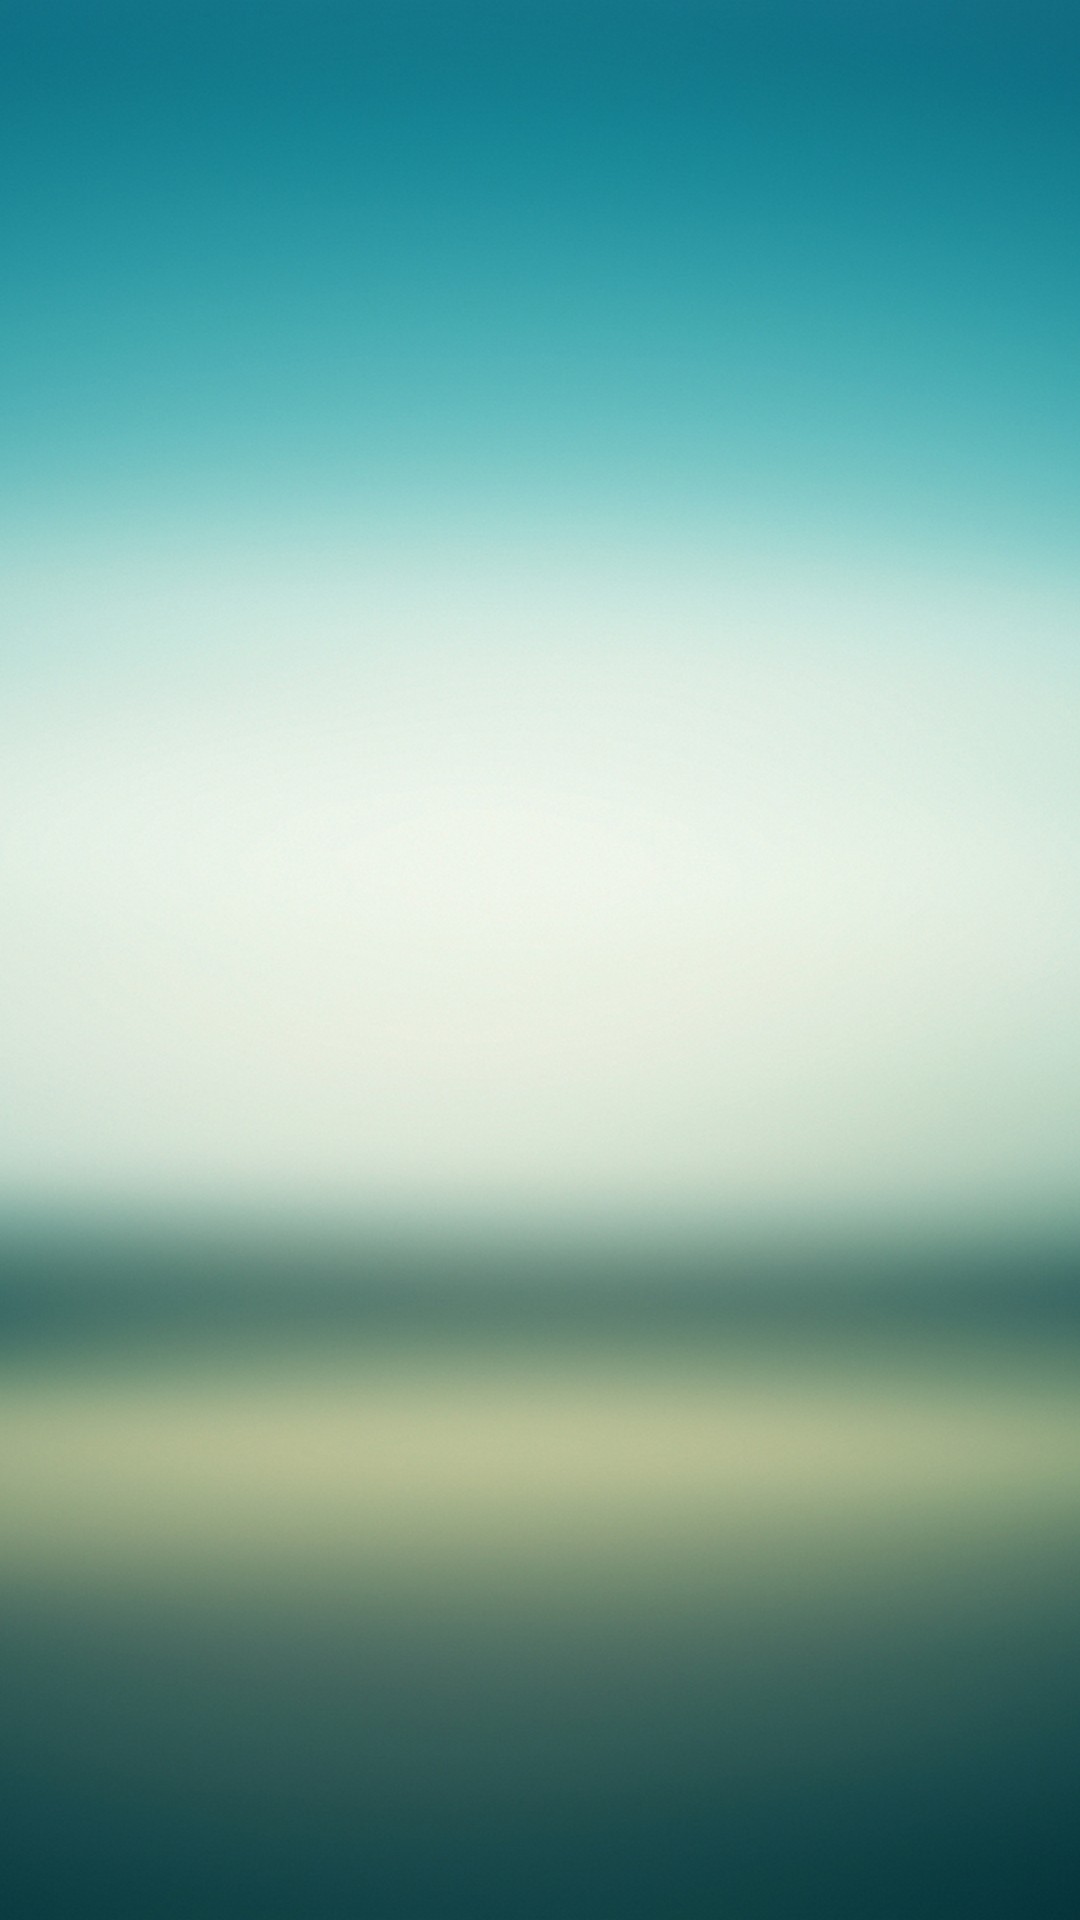 Android Wallpaper Teal Green with resolution 1080X1920 pixel. You can make this wallpaper for your Android backgrounds, Tablet, Smartphones Screensavers and Mobile Phone Lock Screen